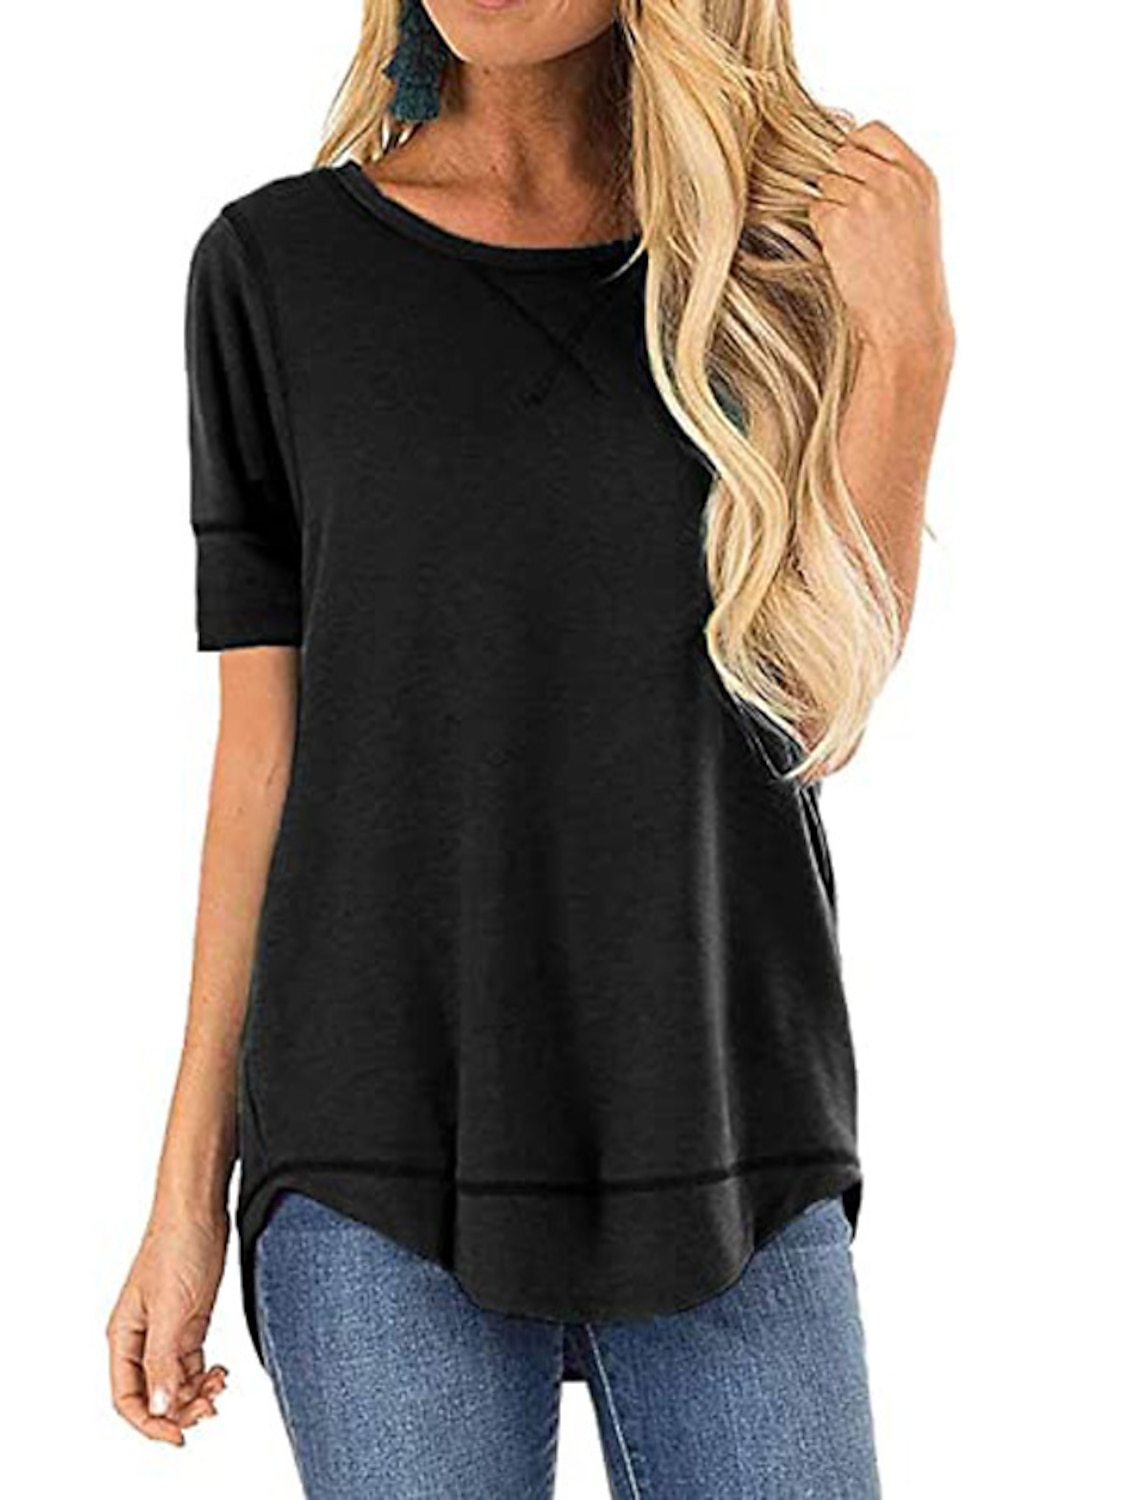 aihihe Casual Tops for Women Long Sleeve Lace Loose O-Neck A Line Flowy T-Shirts Tunic Blouses Tops